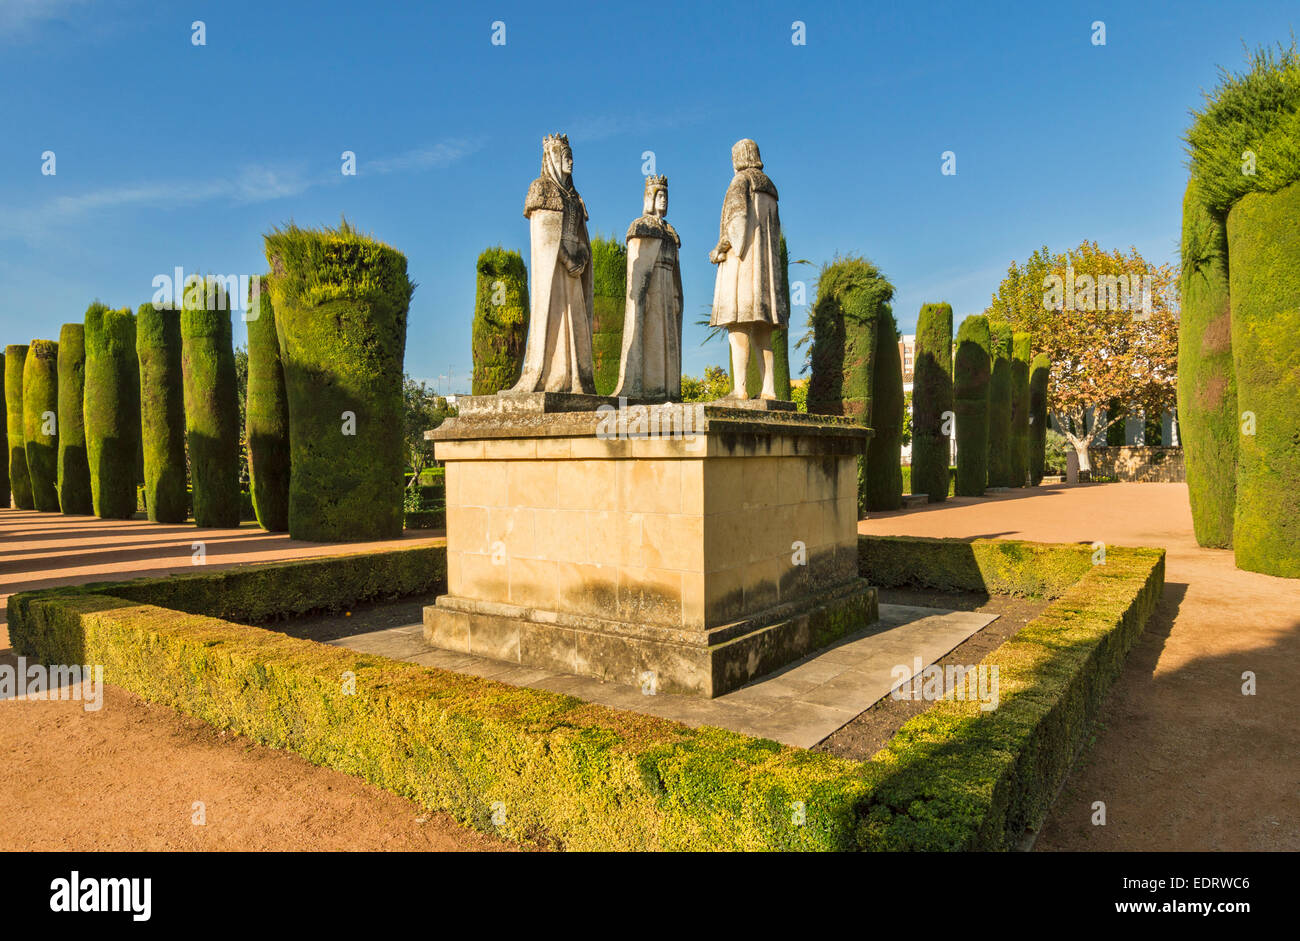 CORDOBA THE GARDEN OF THE ALCAZAR OF THE CHRISTIAN KINGS STATUES OF THE CATHOLIC KINGS AND COLUMBUS Stock Photo